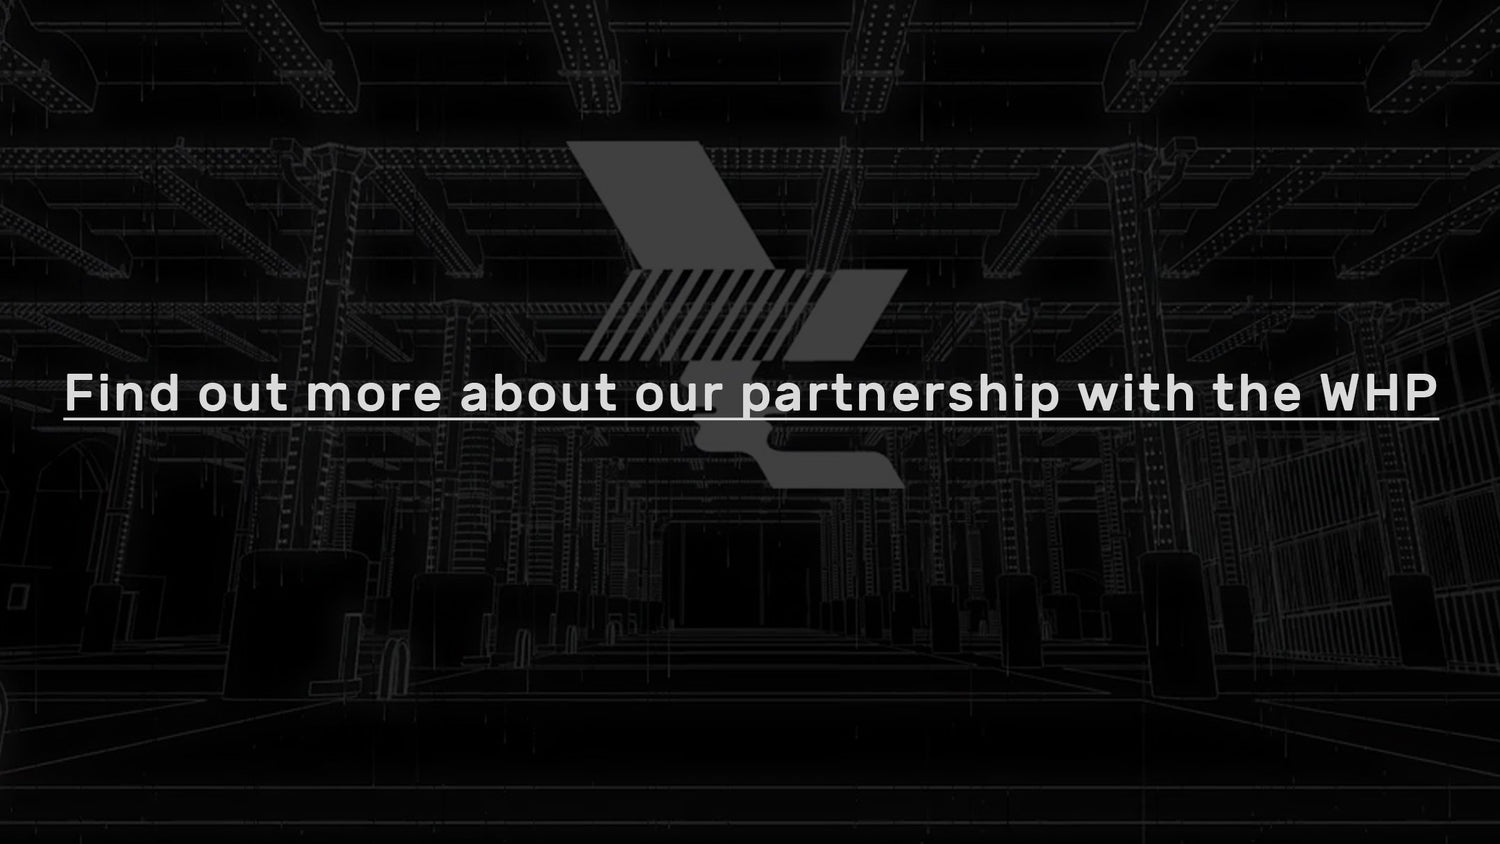 MasterSounds are now the Official Technology Partner for the legendary Warehouse Project - Manchester - MasterSounds